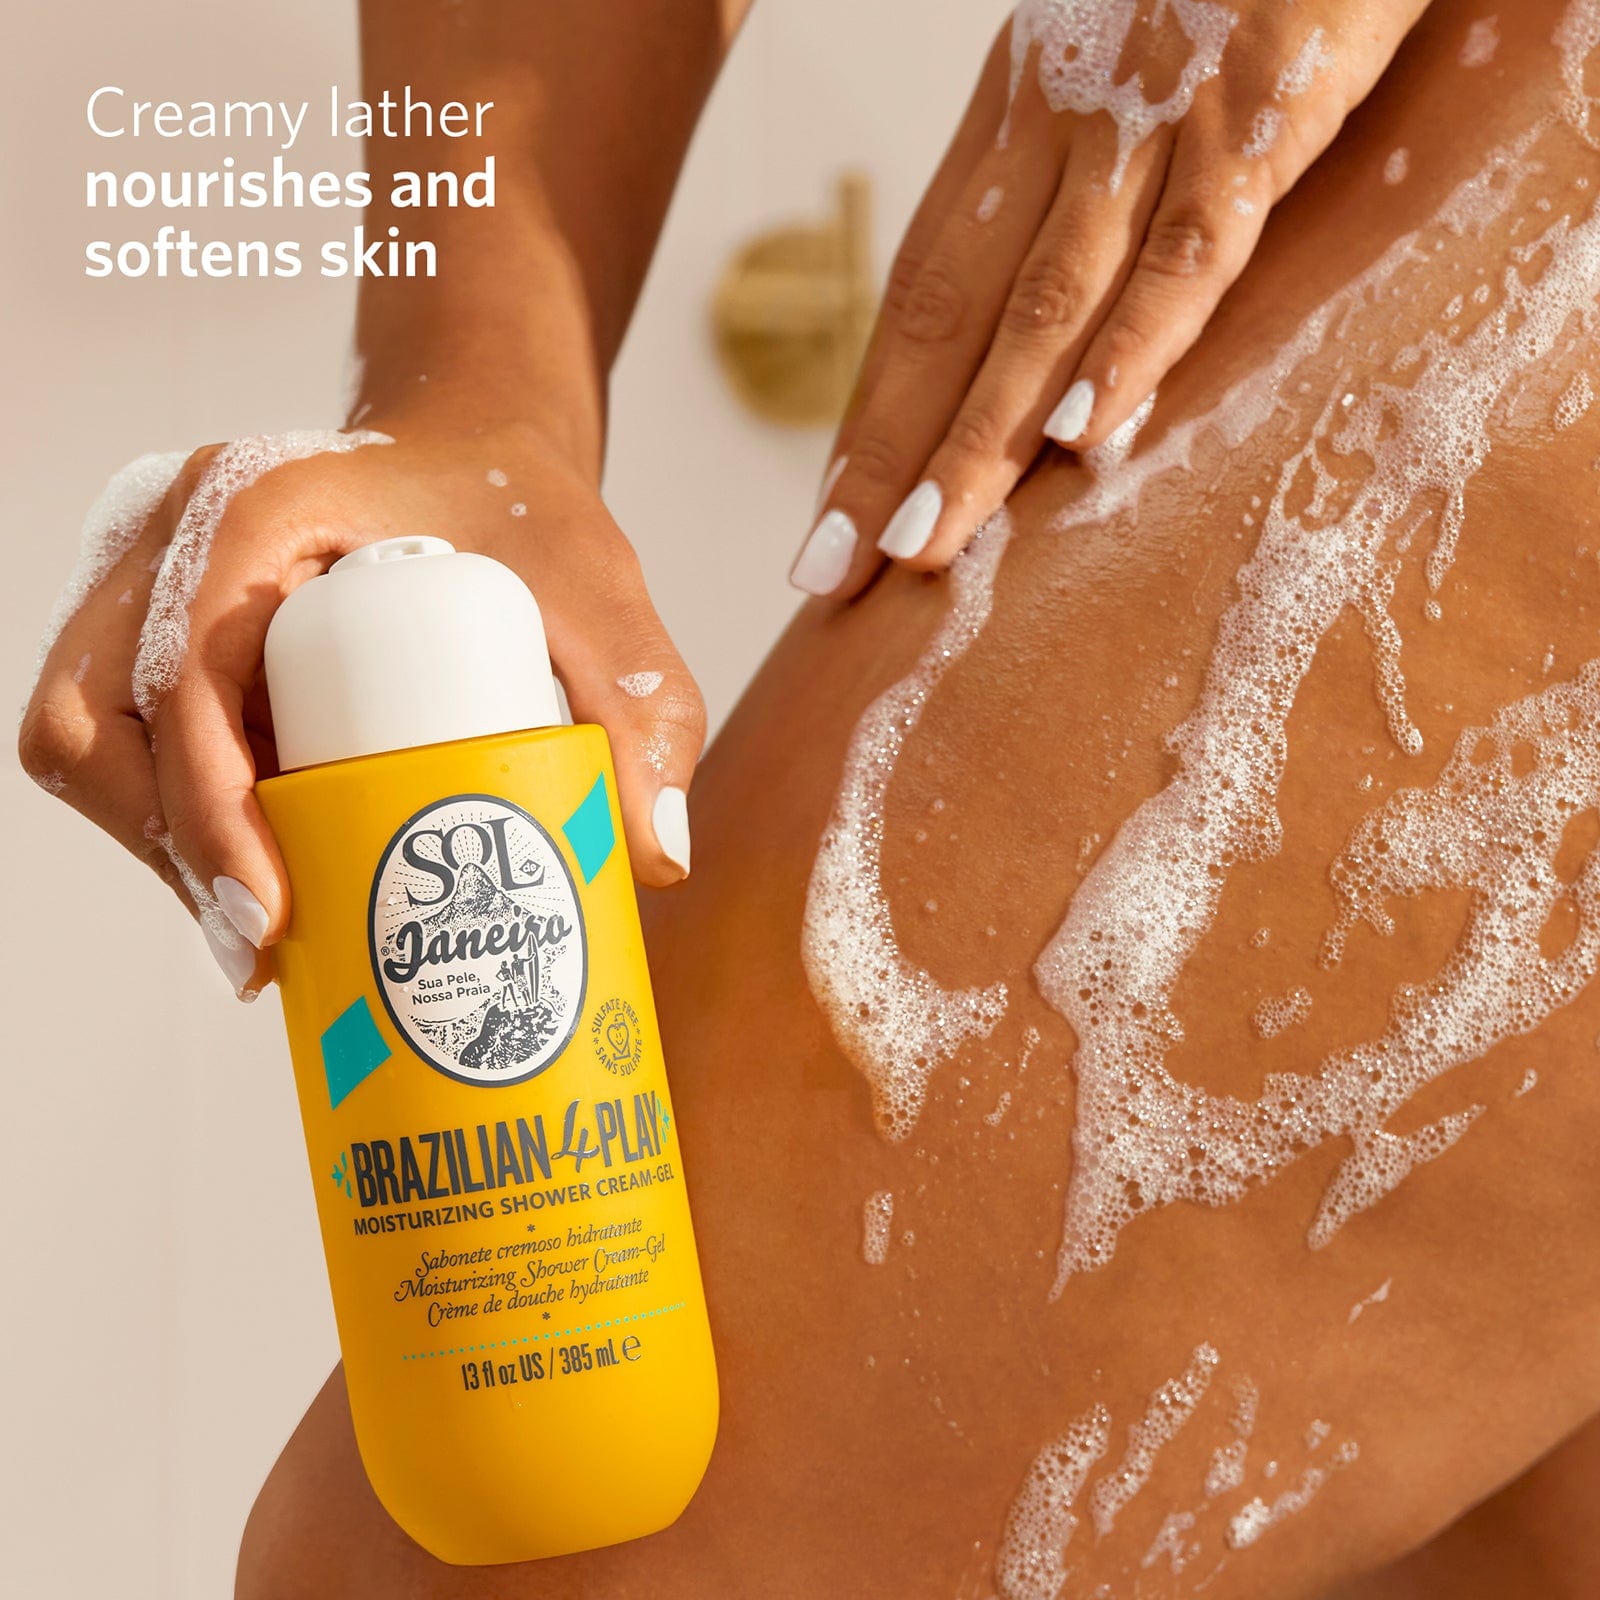 Creamy lather nourishes and softens skin